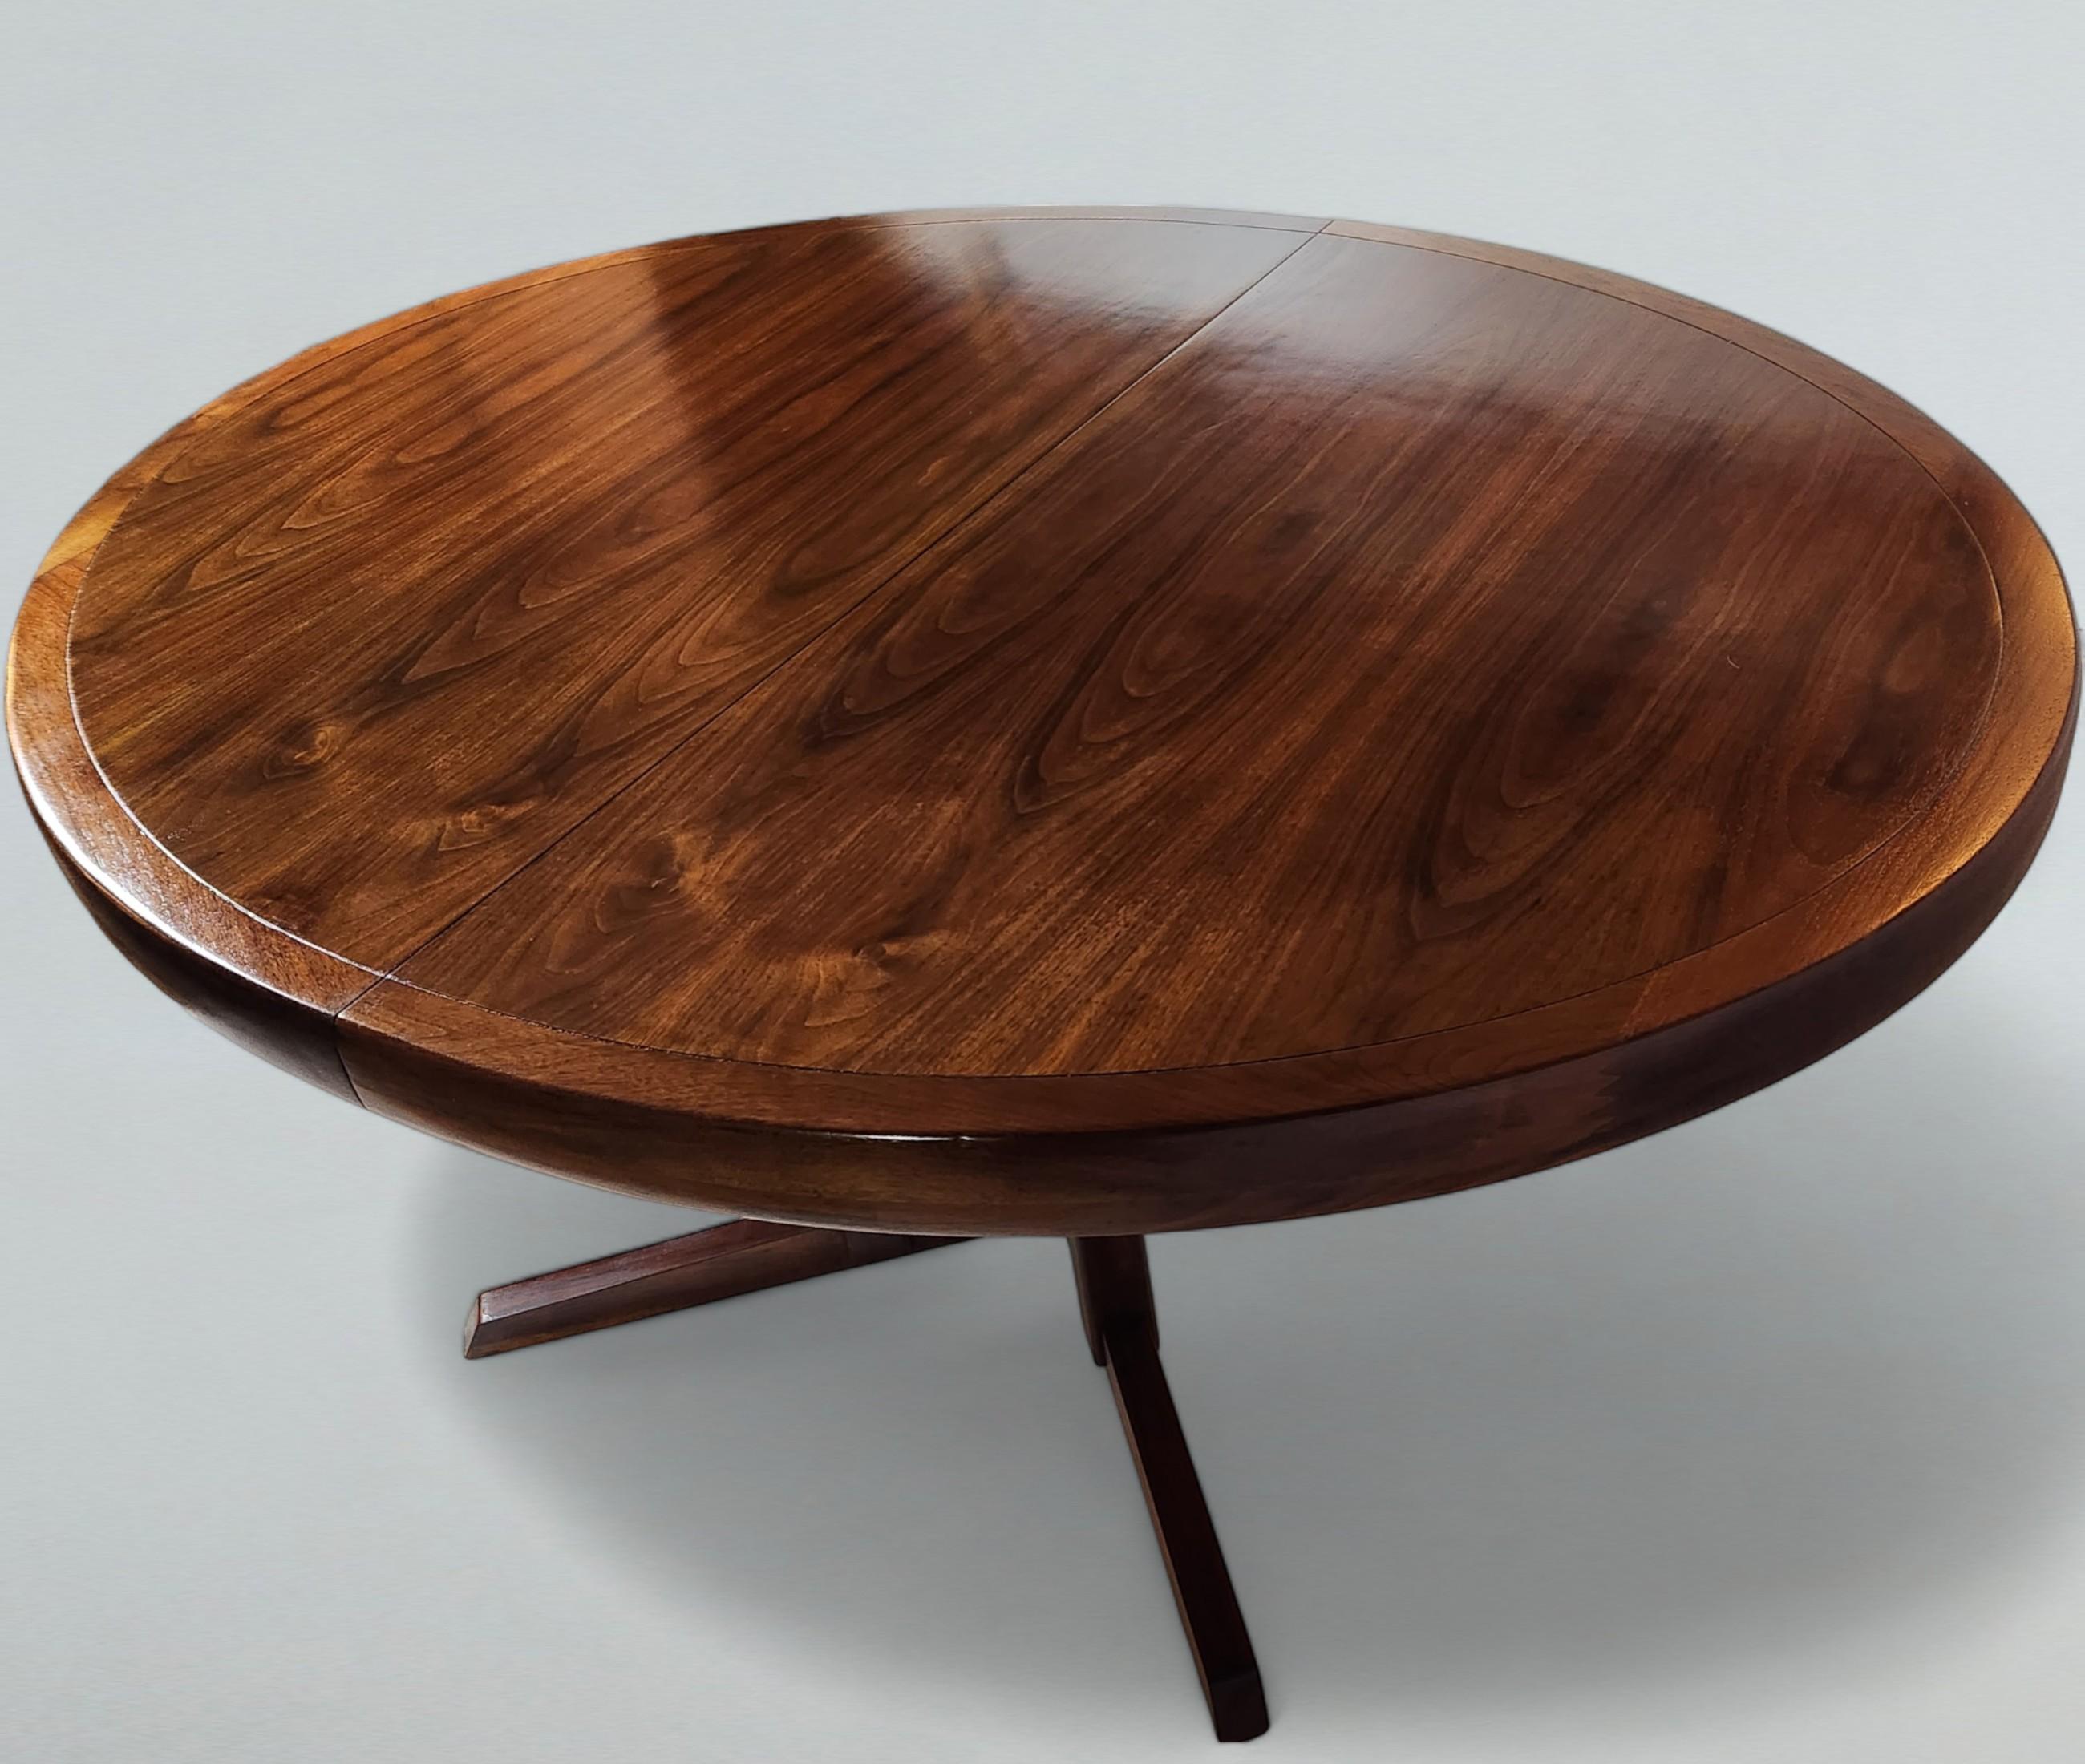 American George Nakashima Extendable Walnut Dining Table Model 277 for Widdicomb, 1959 For Sale